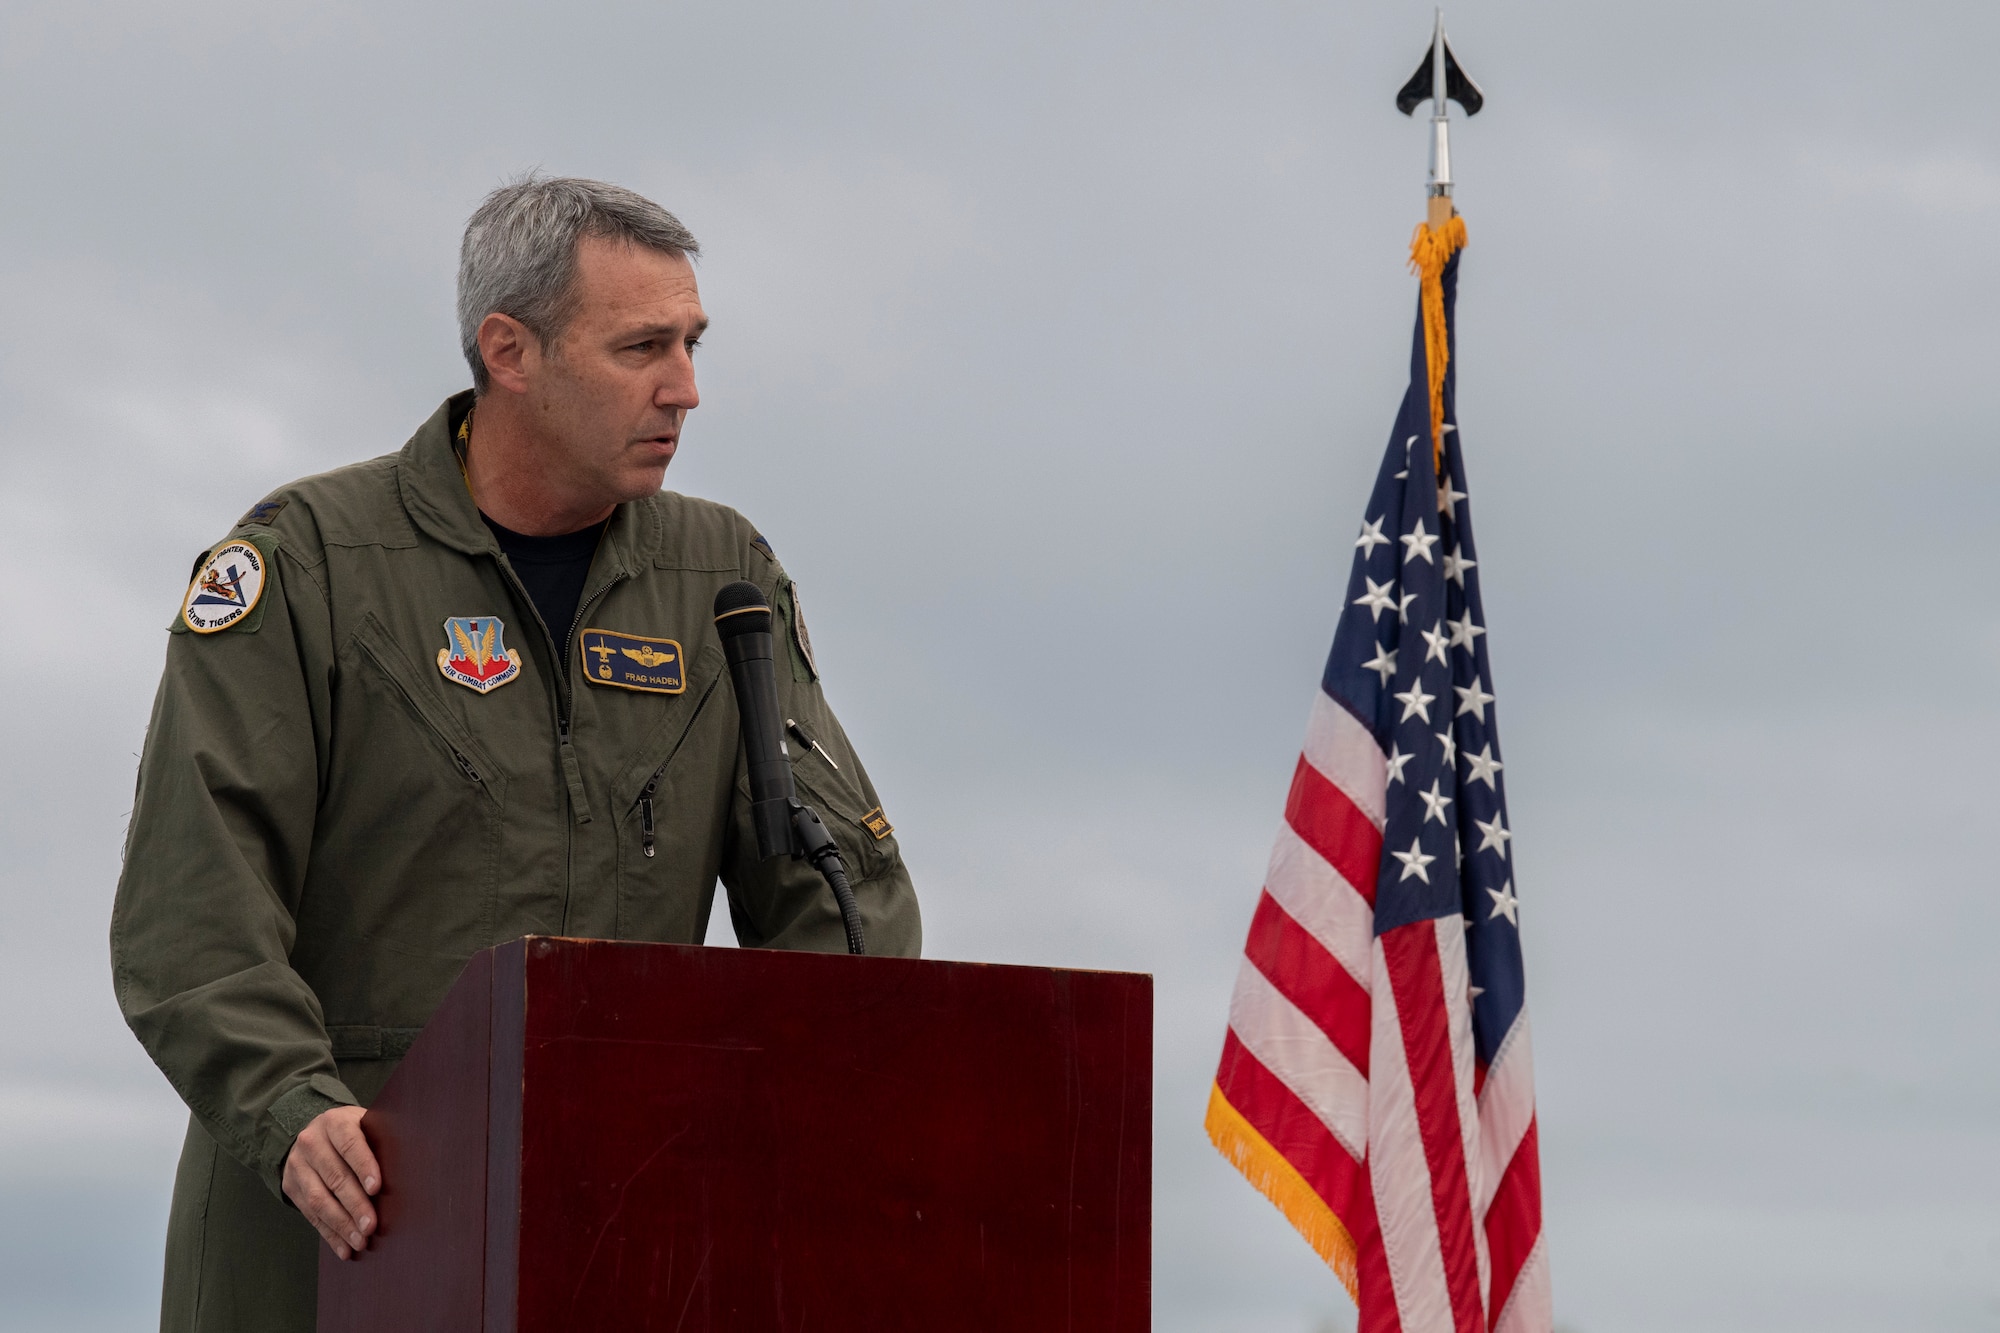 A photo of an Airman standing at a podium.